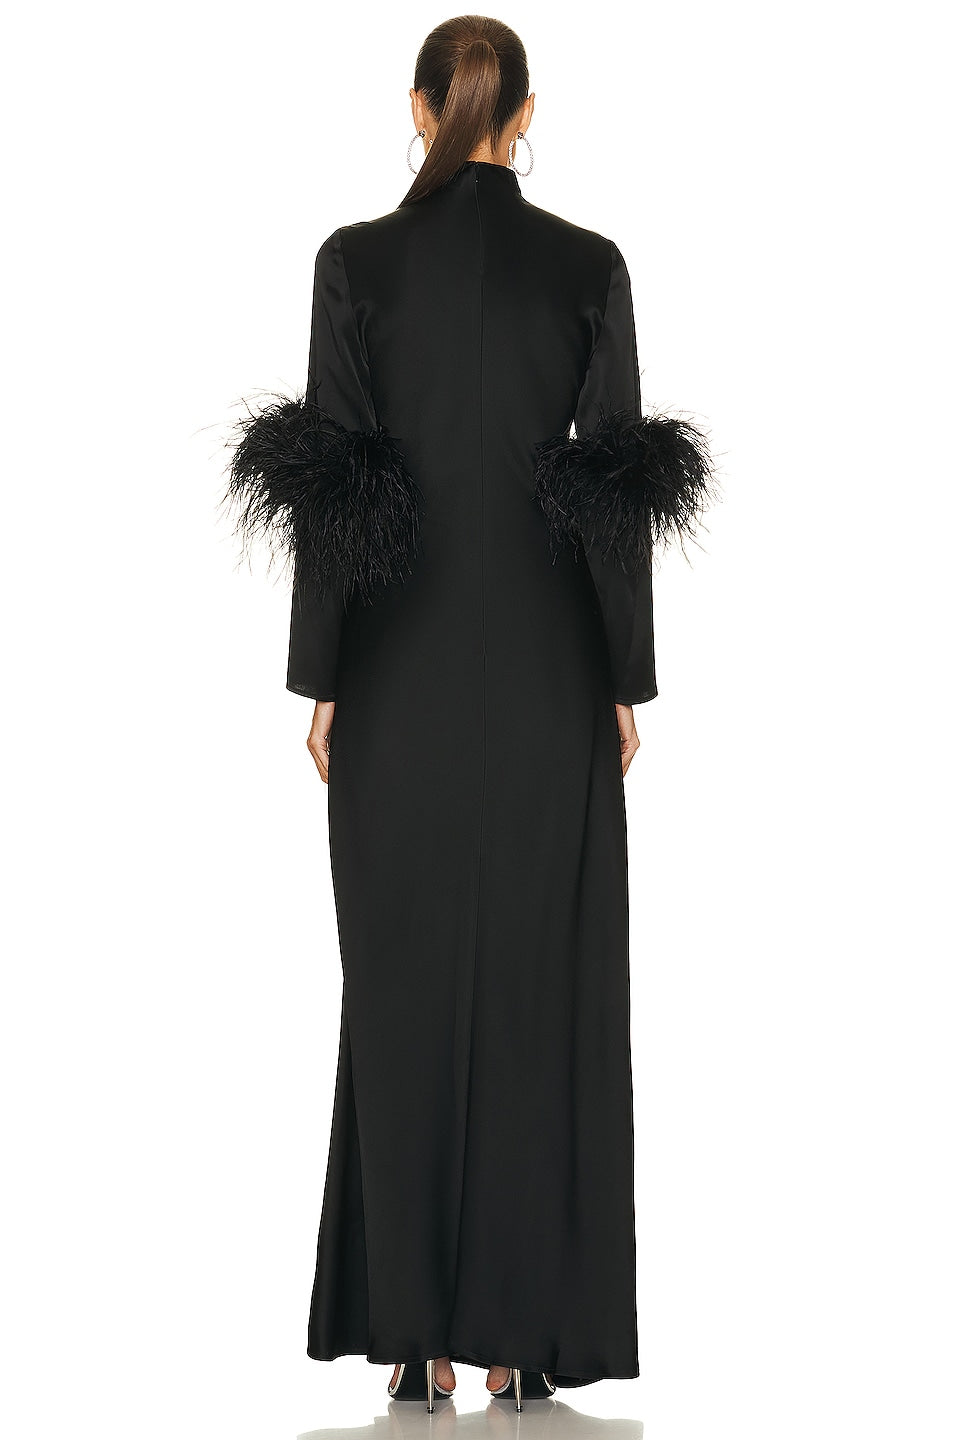 Lapointe Ostrich Feather Slit Maxi Dress in Black SIZE 2 -new no tags